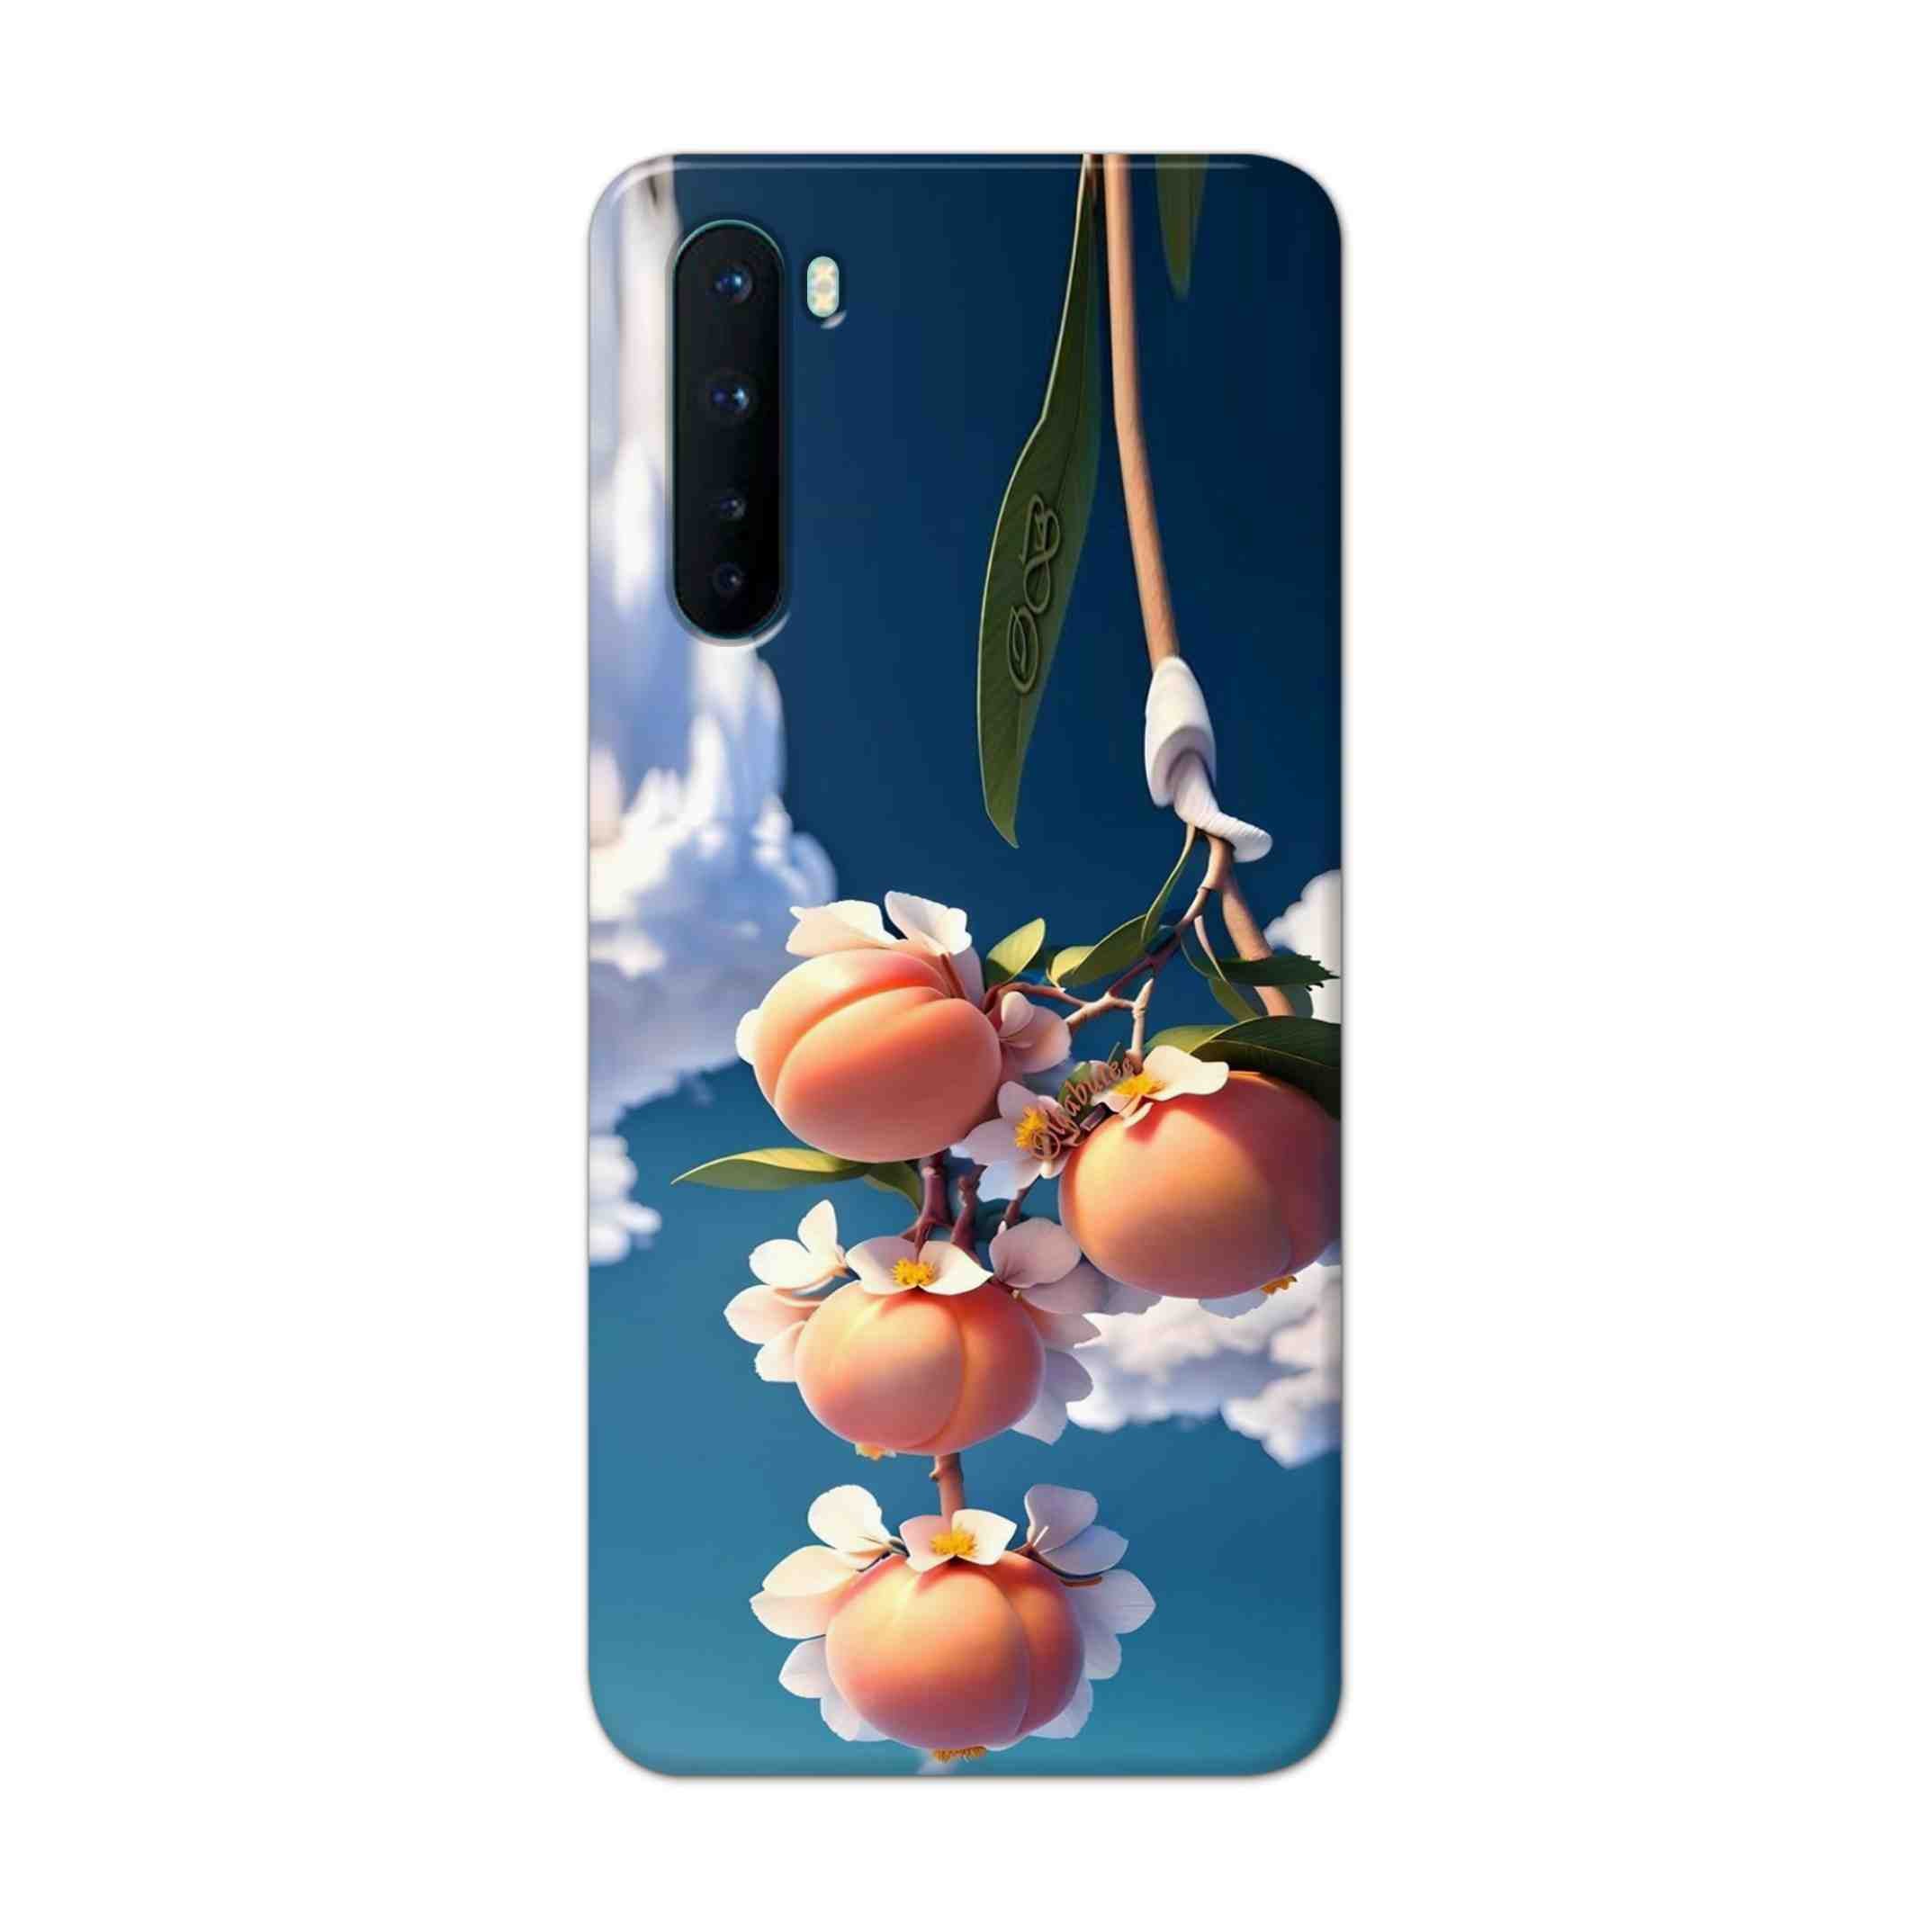 Buy Fruit Hard Back Mobile Phone Case Cover For OnePlus Nord Online